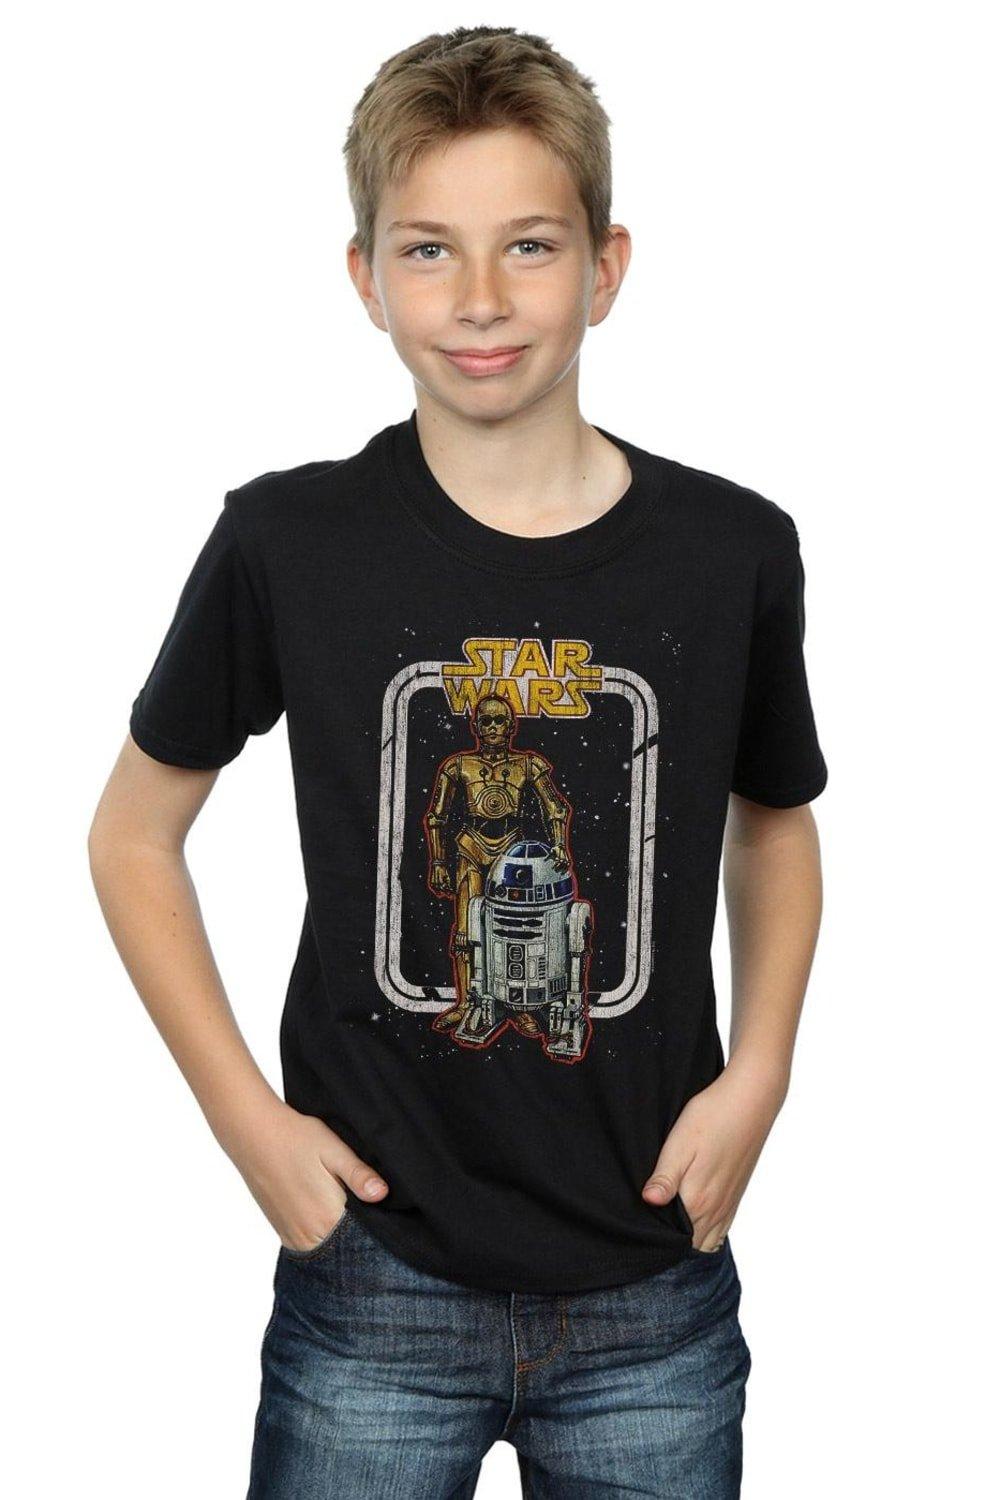 R2-D2 And C-3PO Vintage T-Shirt